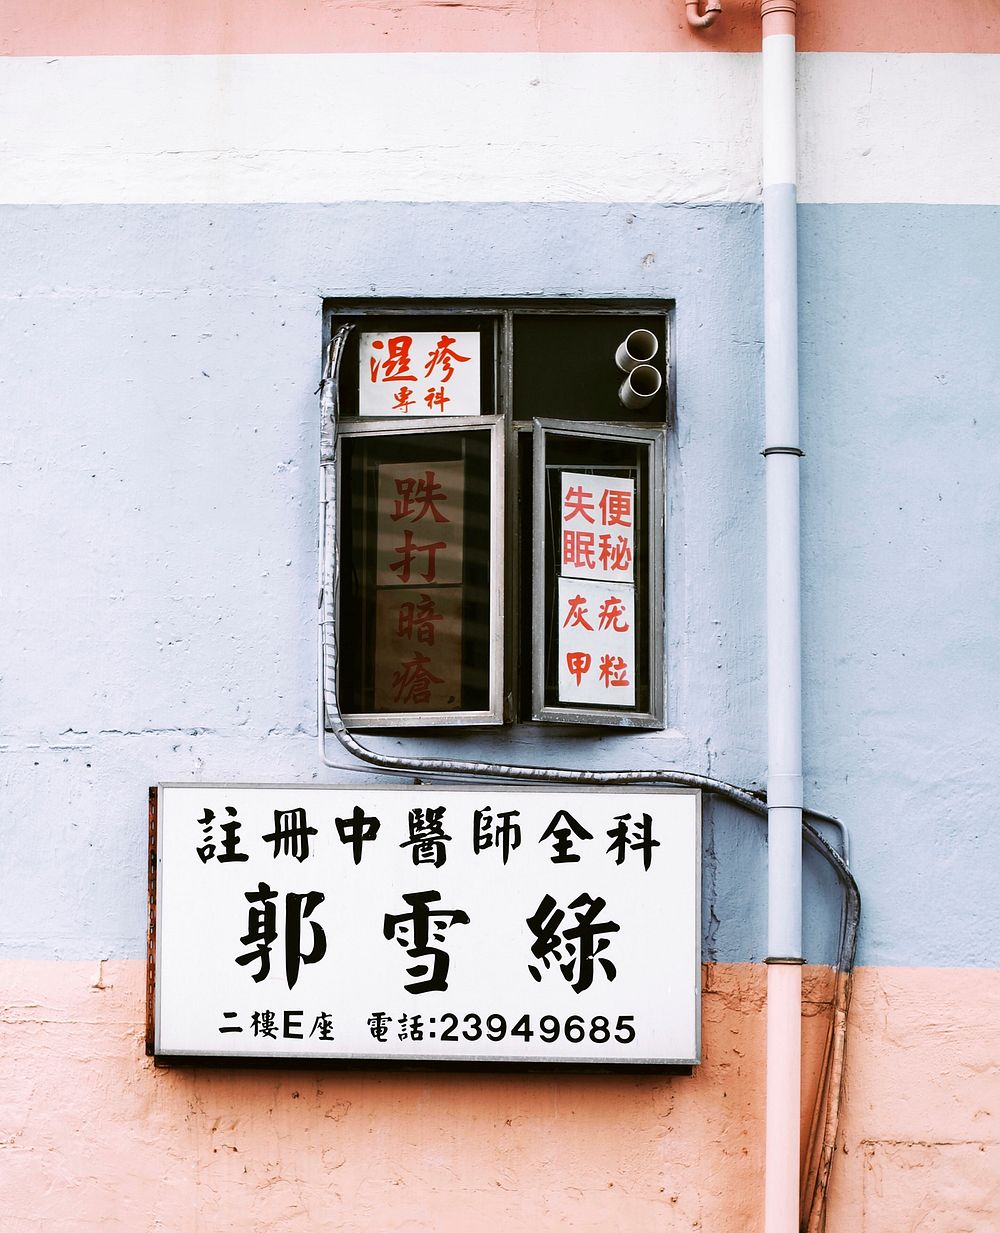 Chinese shop signage. Location unknown - 05/13/2017